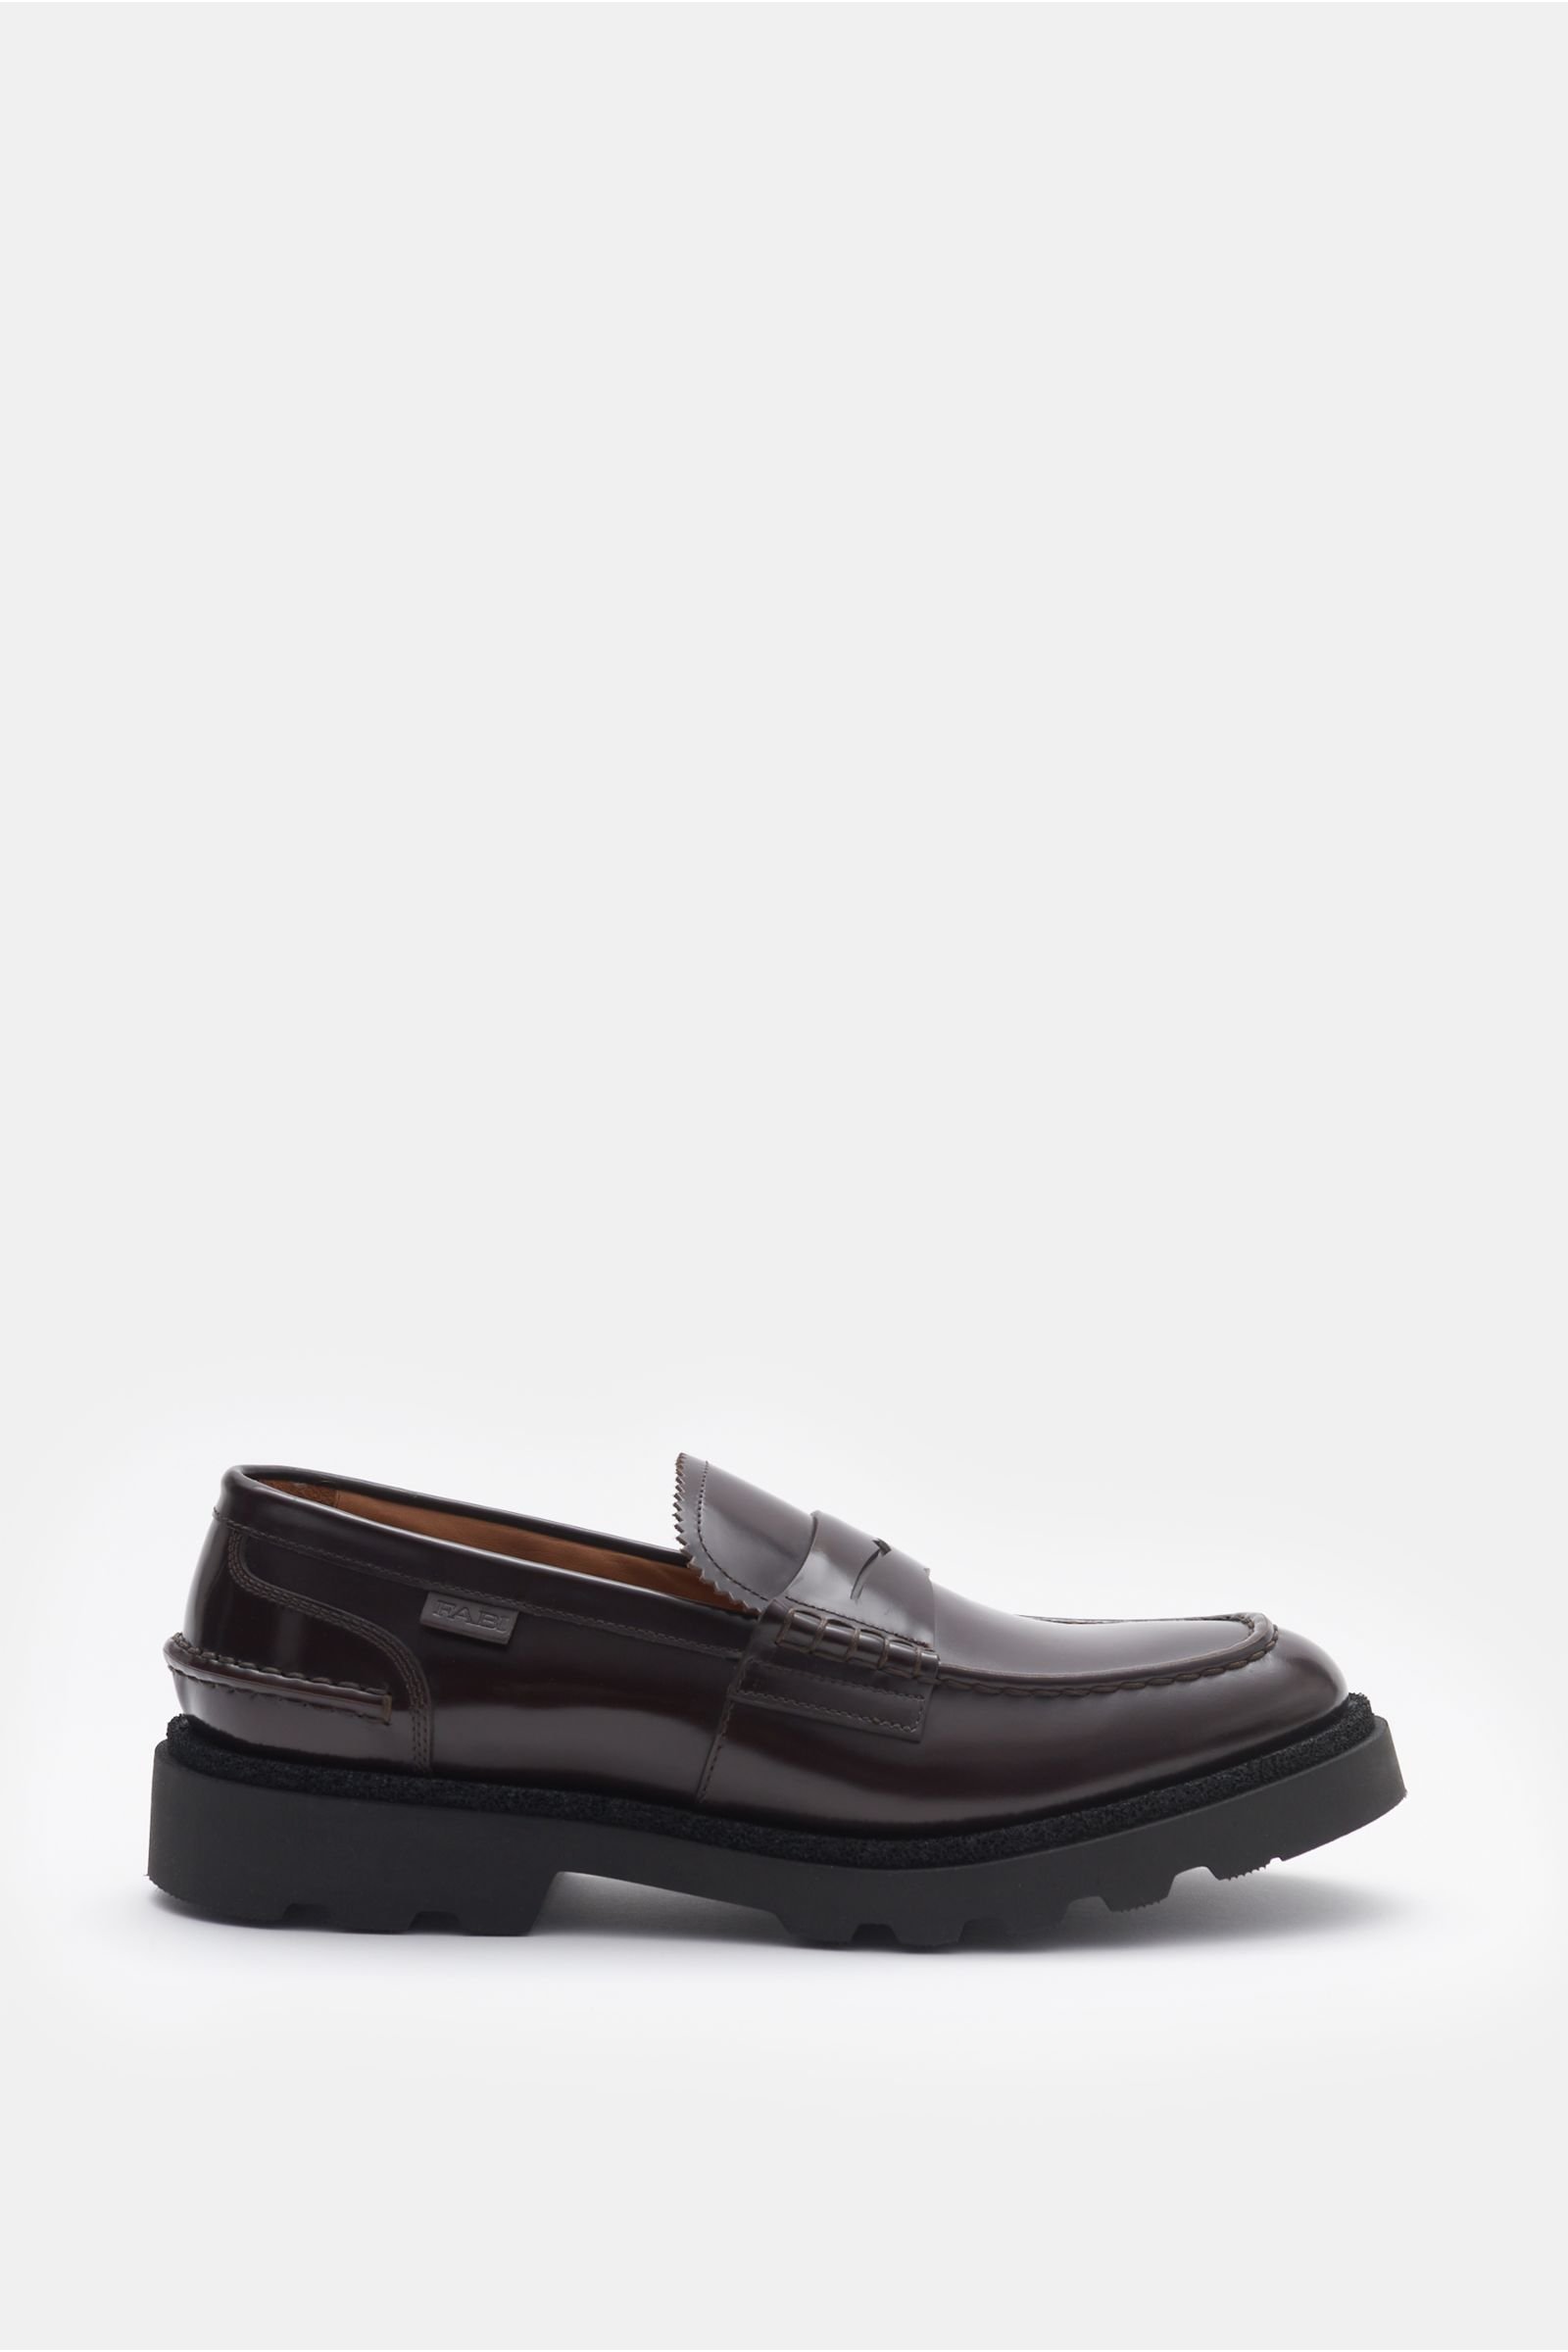 Penny loafers burgundy